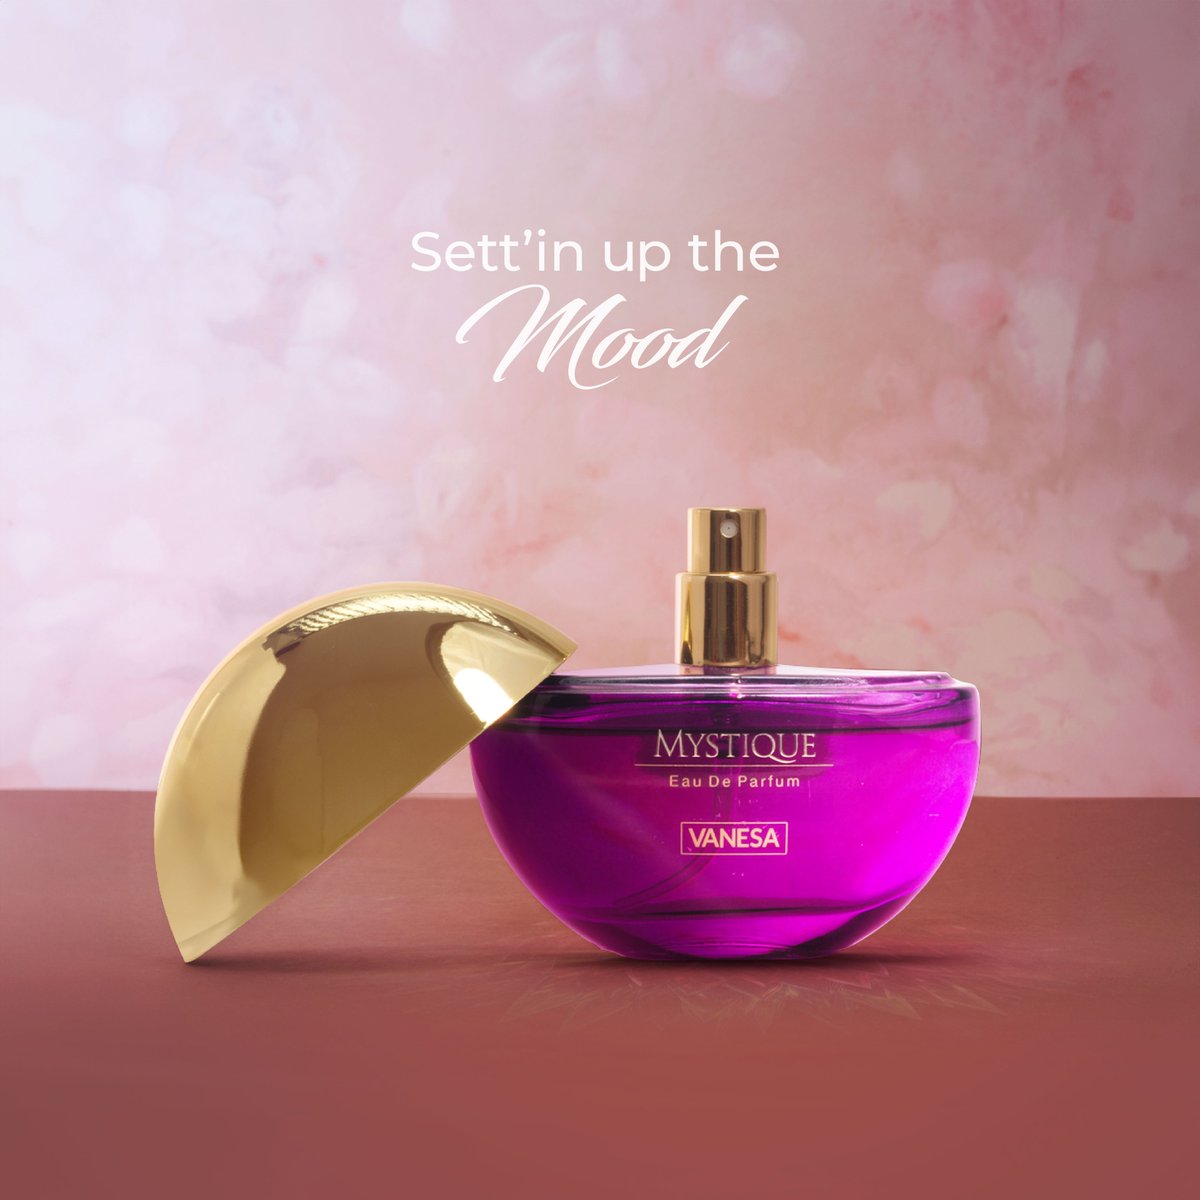 Unlock the secret language of scents with Vanesa Fragrance - where setting the mood is an art, and smelling fabulous is a lifestyle! Love Your Self Love Vanesa #vanesabeauty #vanesaEDP #Vanesa #EDP #VanesaPerfume #Mystique #MystiquePerfume #Selflove #Selfcare #BodyCare